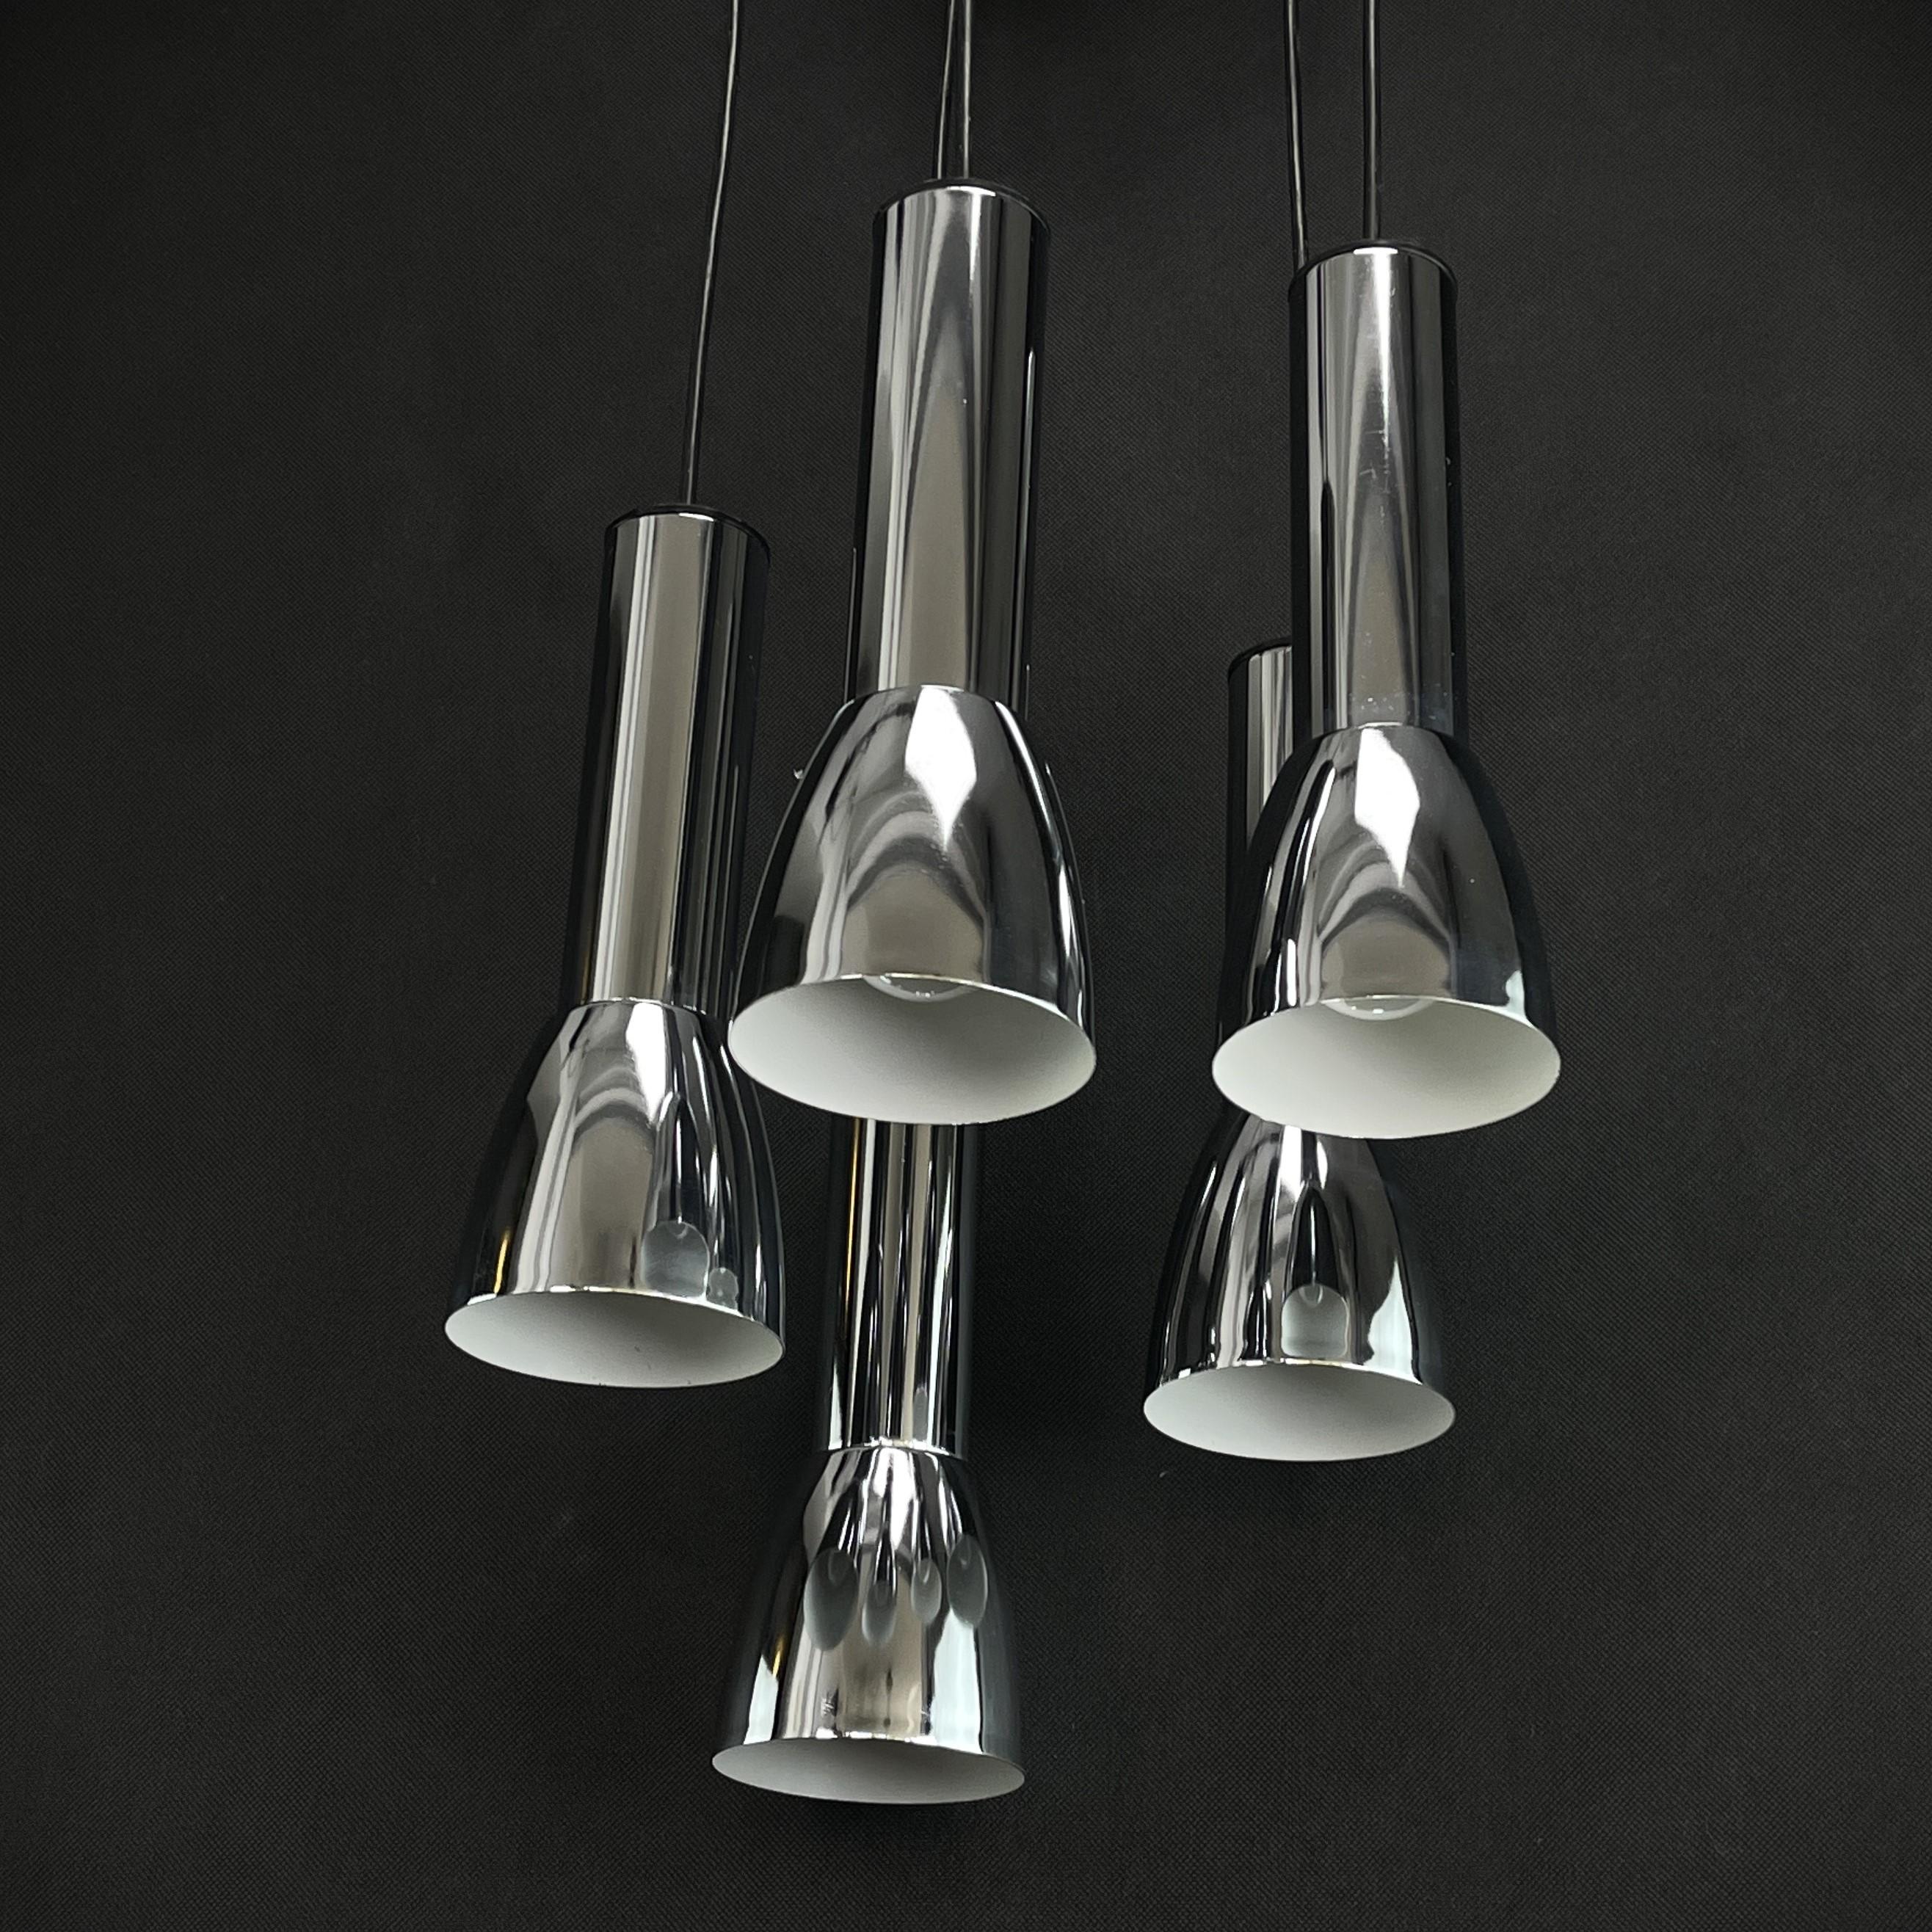 Late 20th Century 1960s-1970s Cascade Chandelier Chrome Space Age